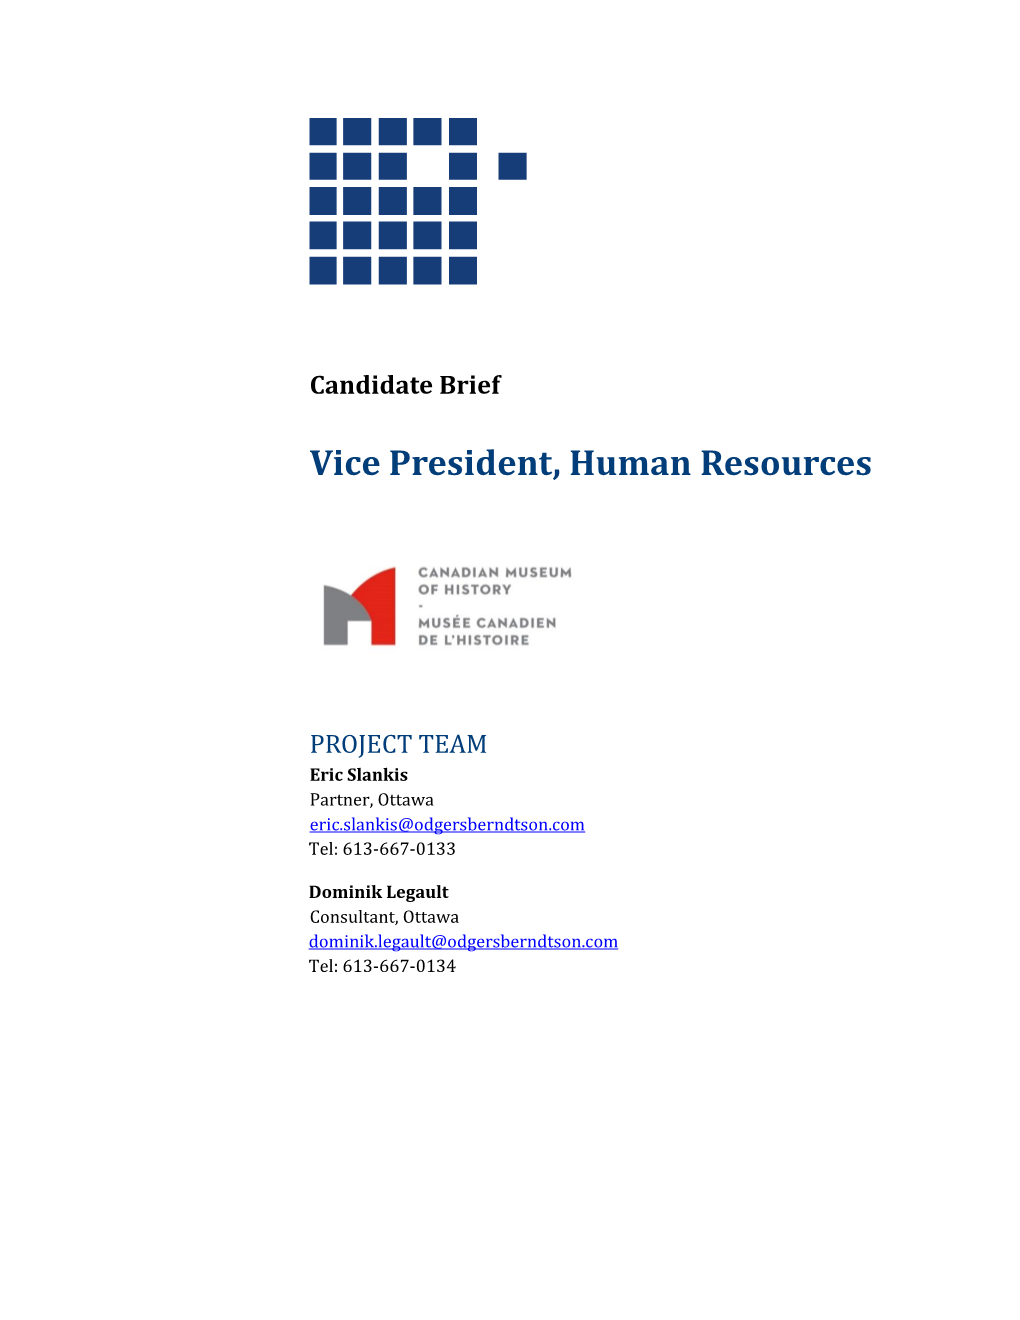 Vice President, Human Resources